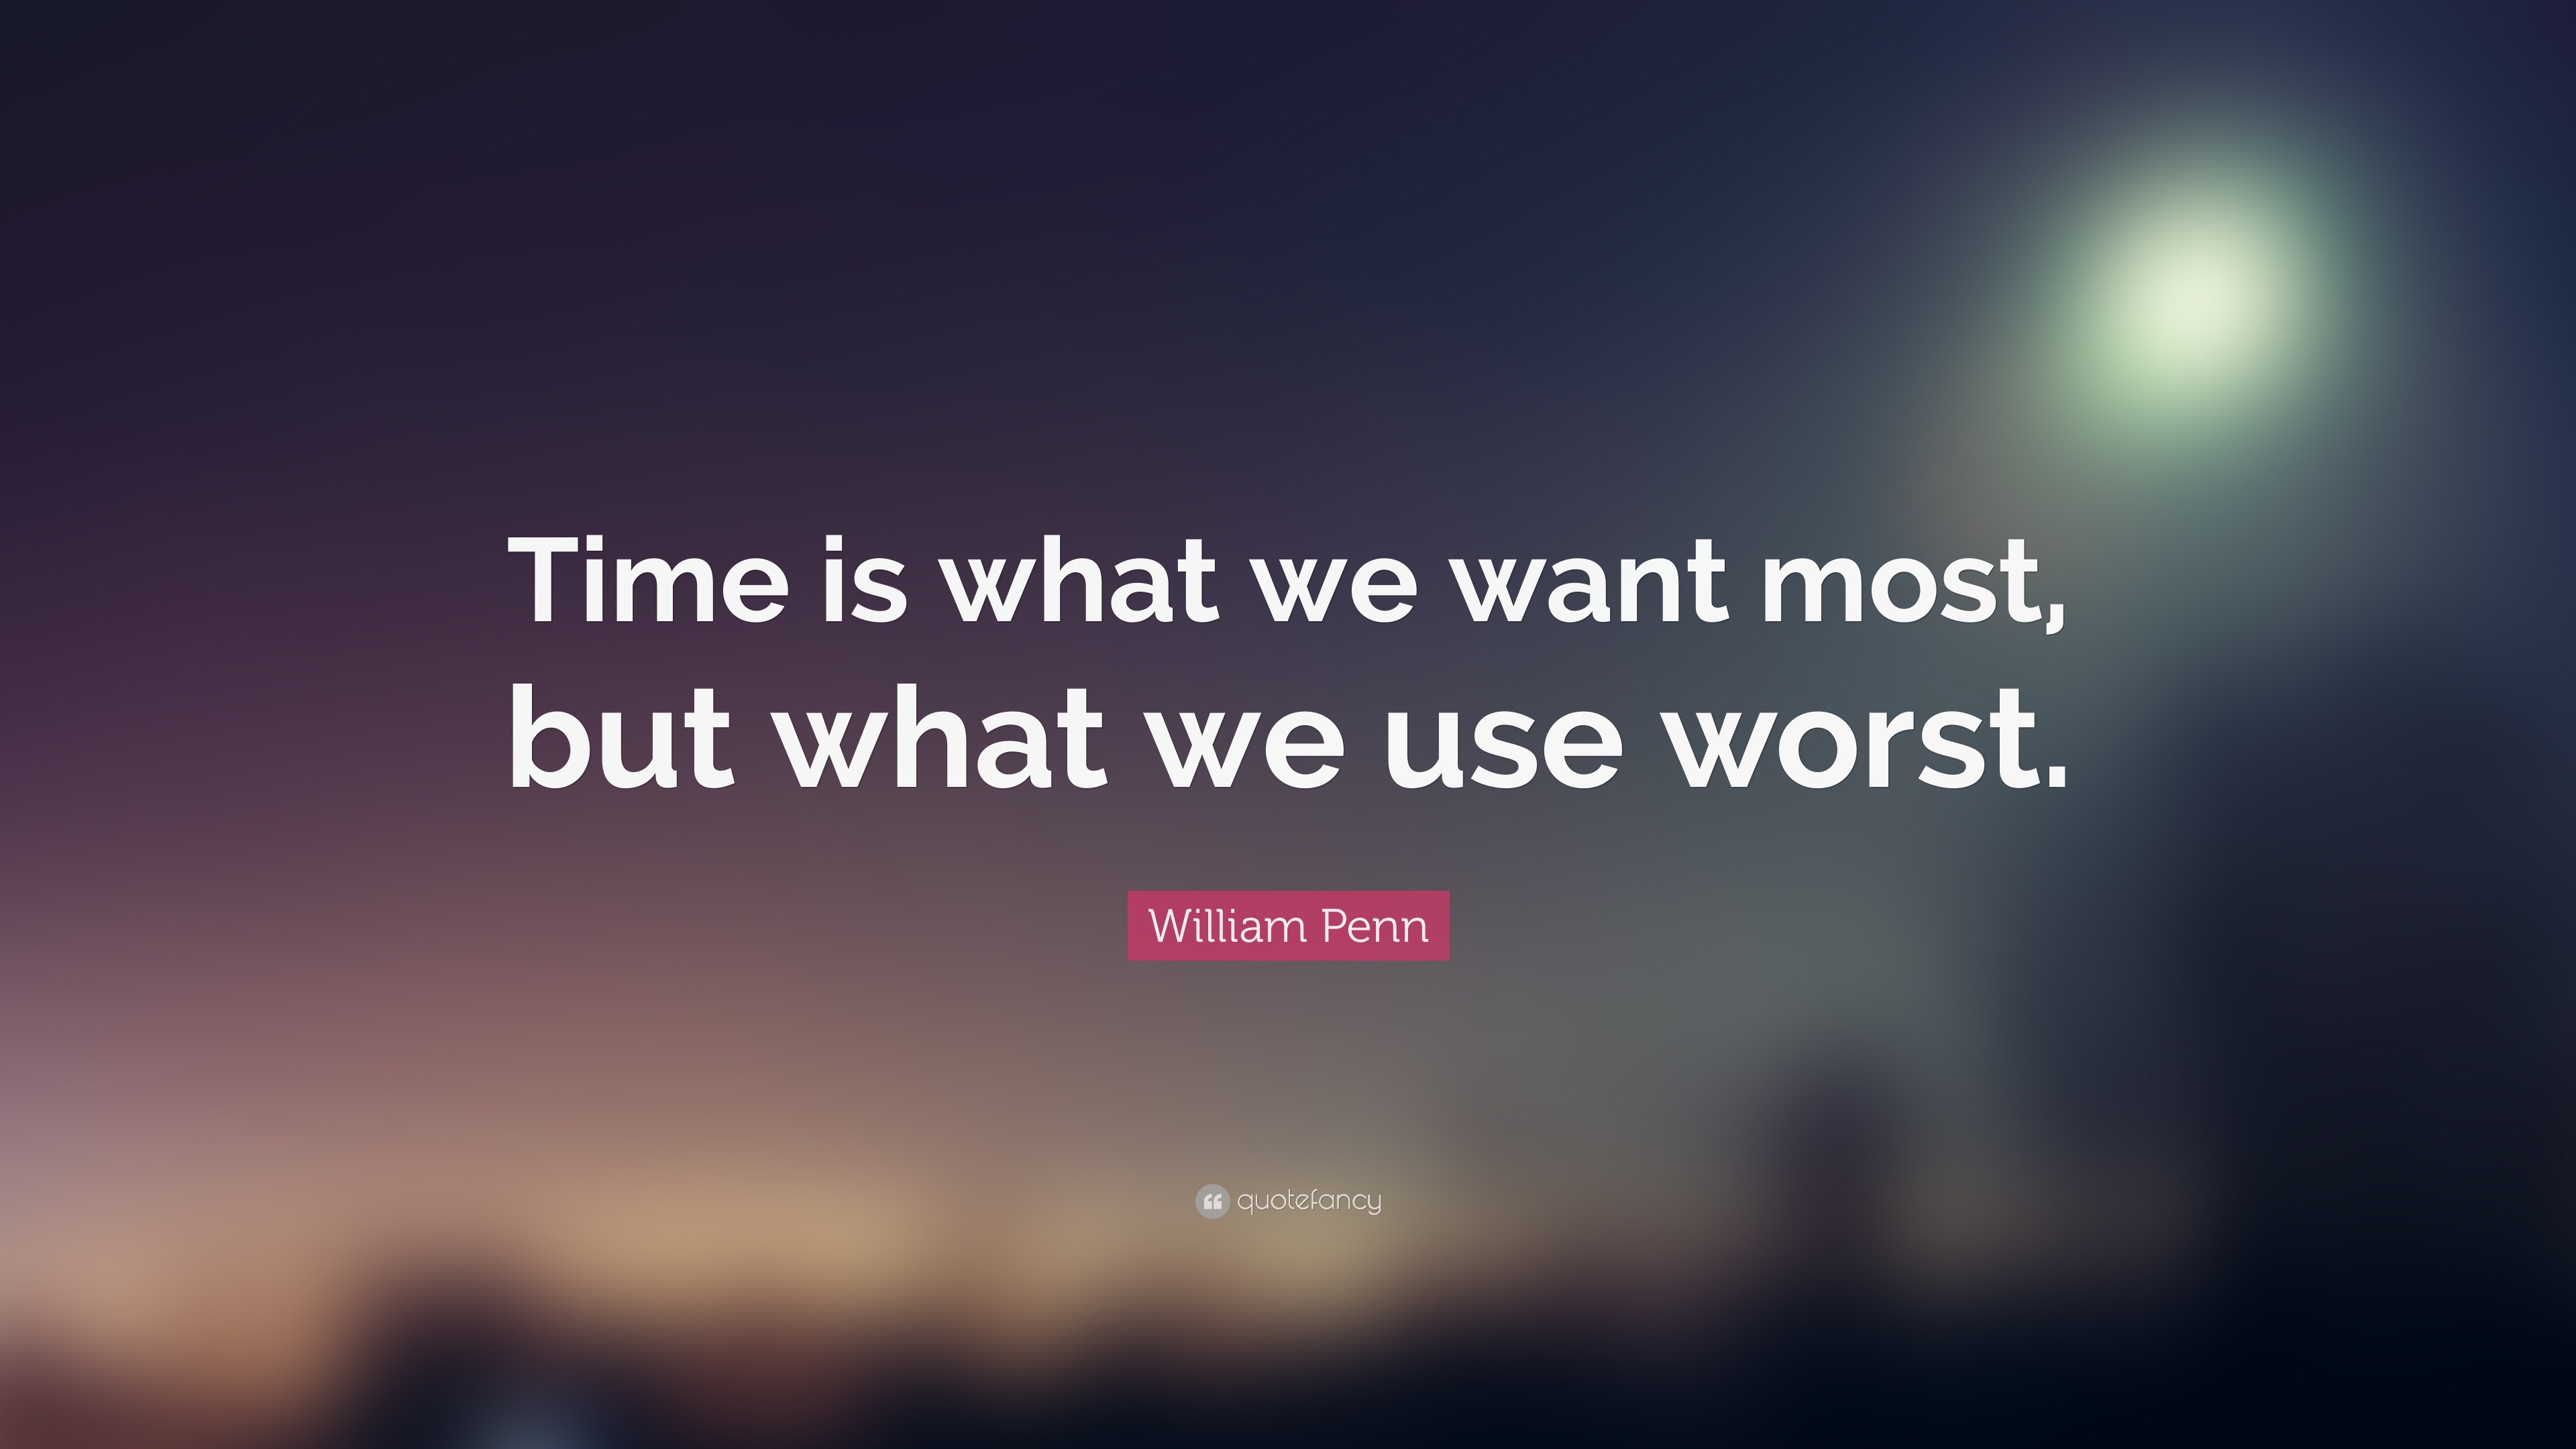 William Penn Quote: “Time is what we want most, but what we use worst.”